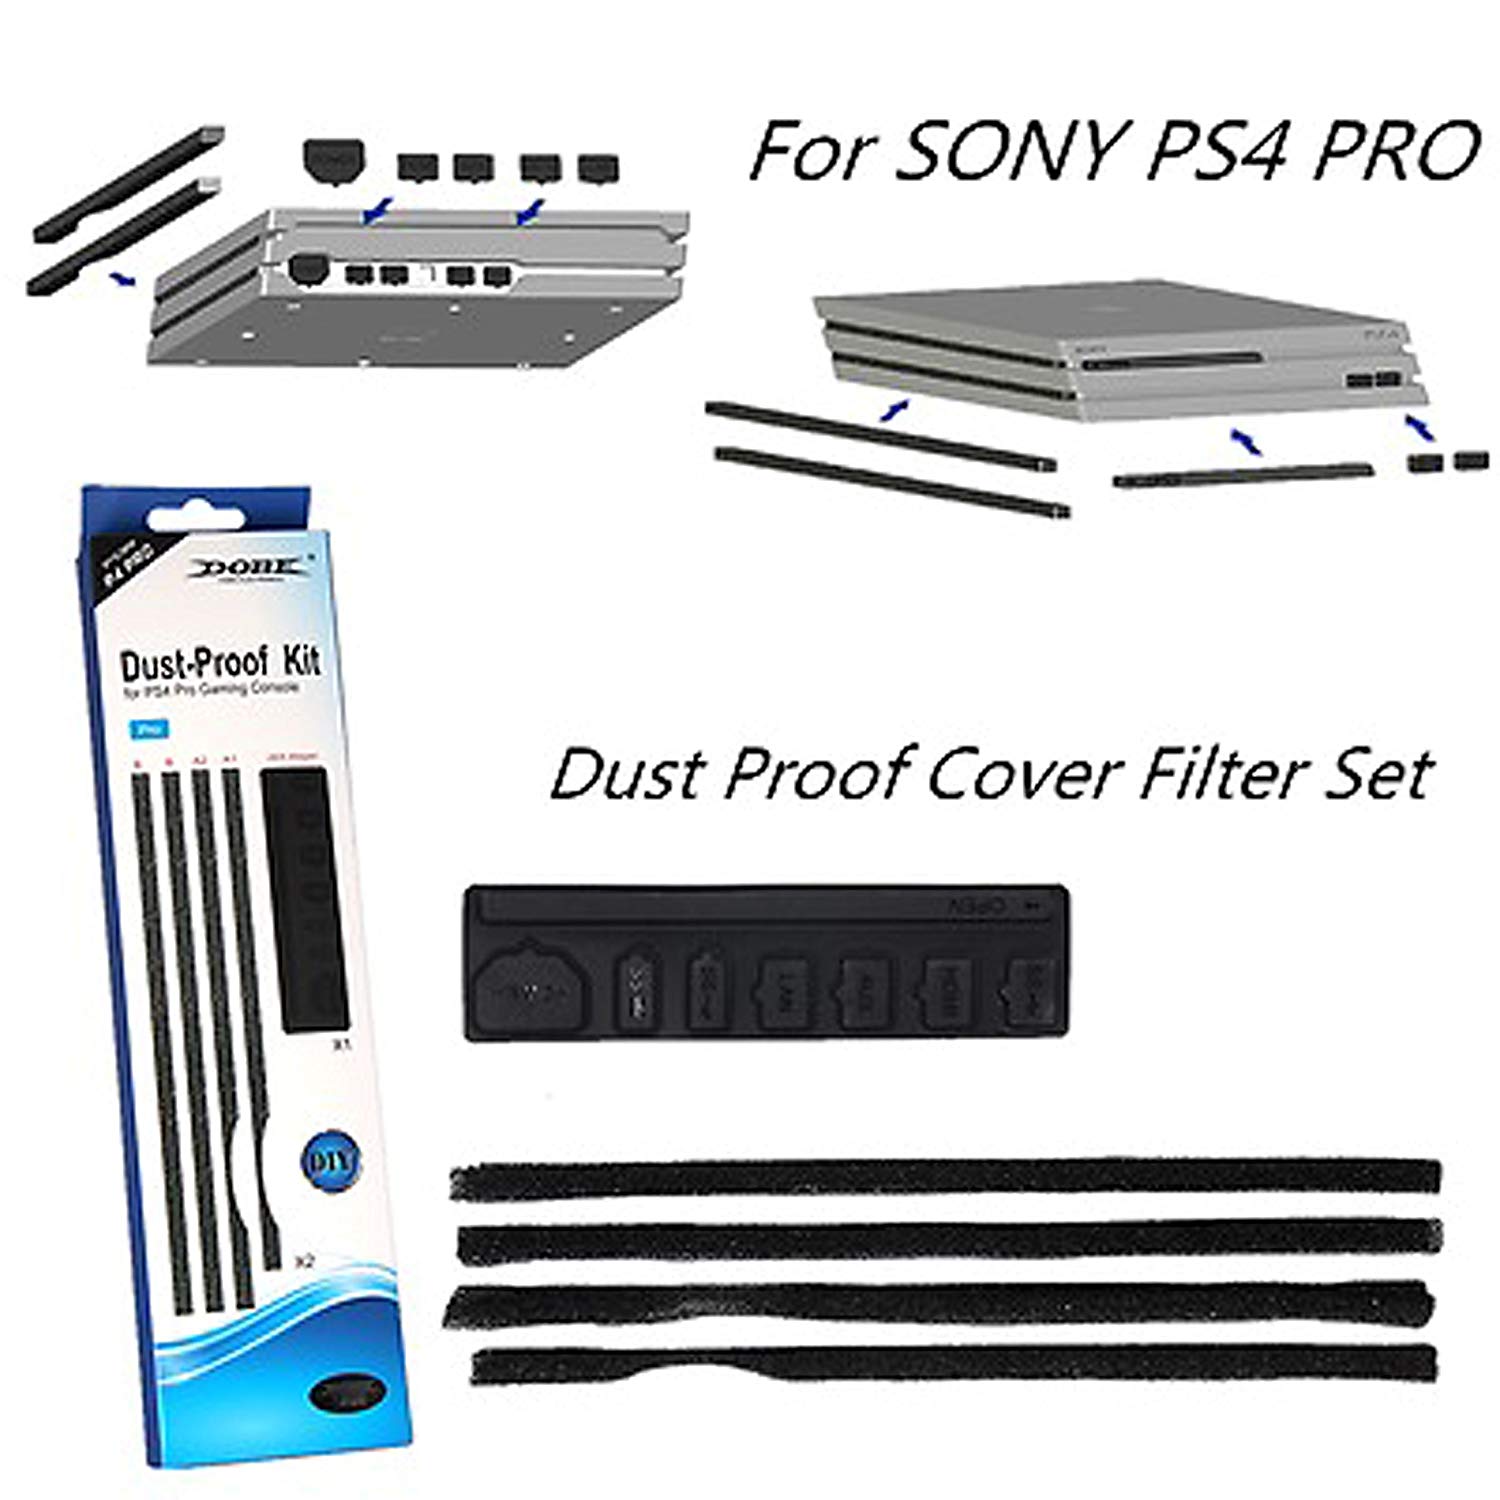 Professional Dust Cover Kits